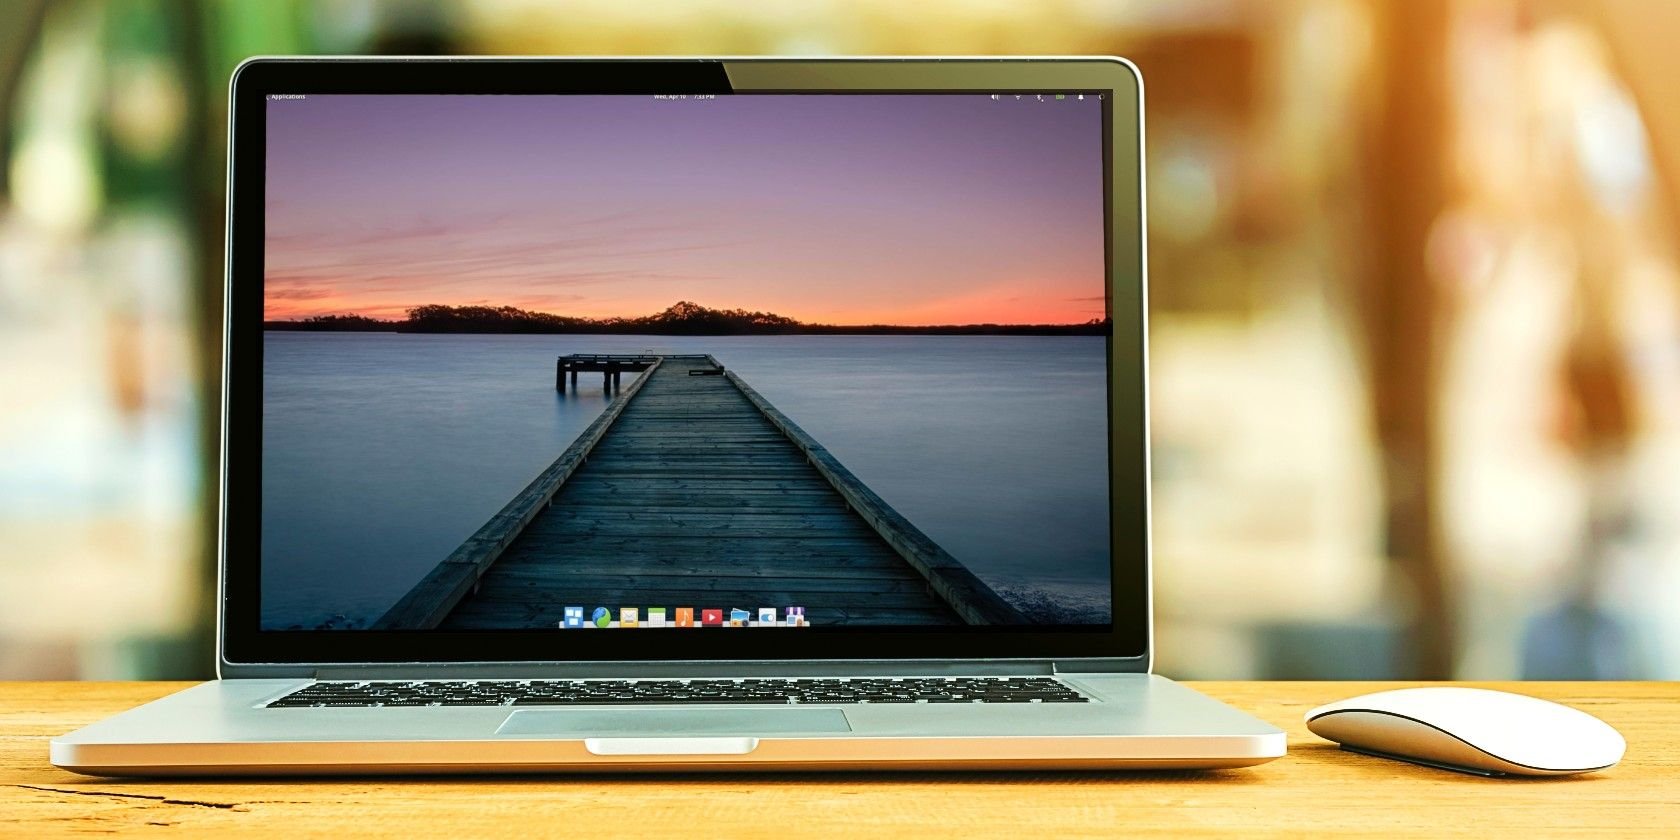 What Is the Best Linux Distro for Laptops?